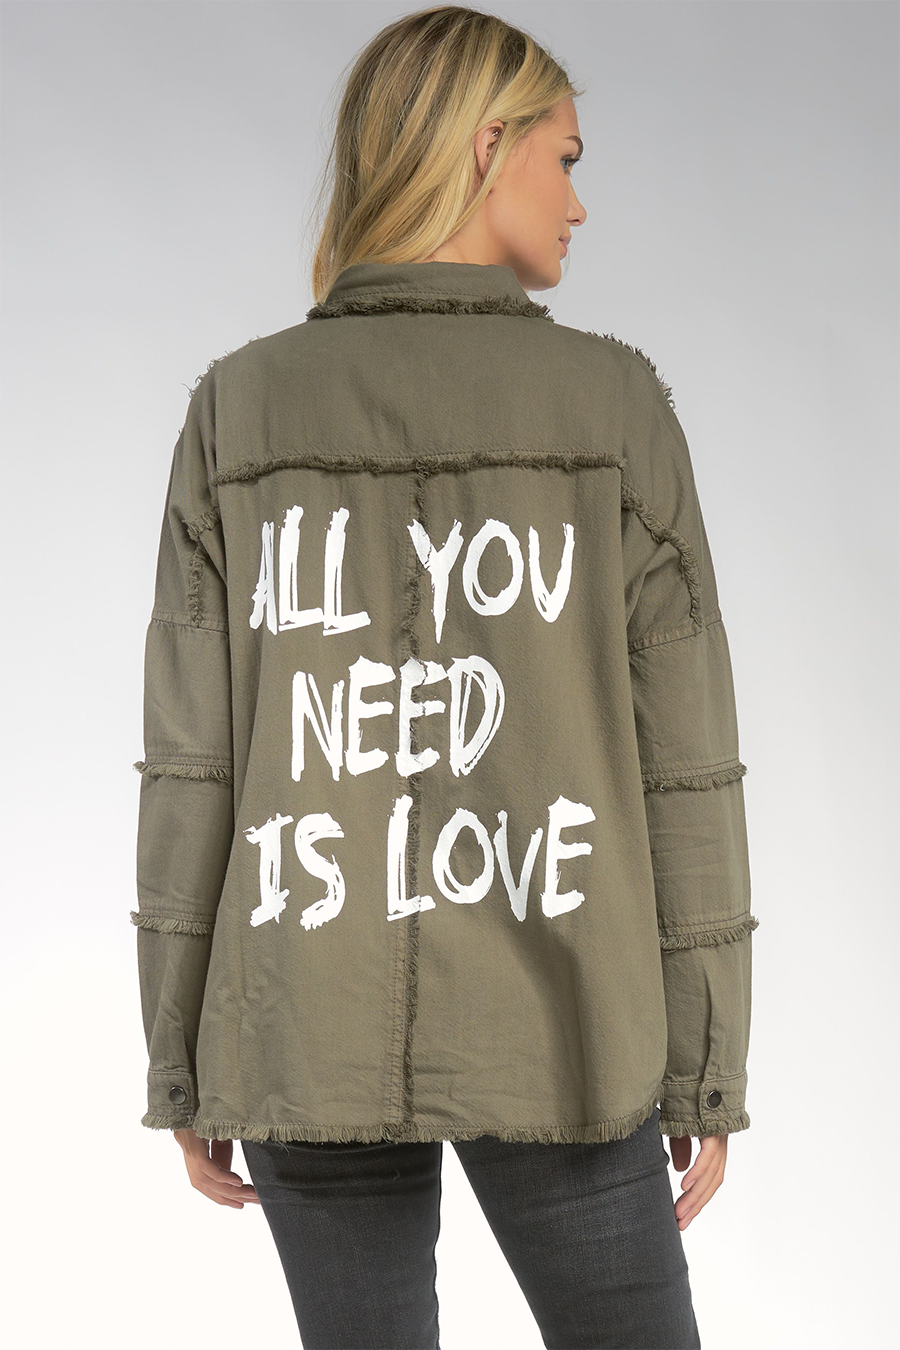 All You Need Is Love Jacket | Olive - Main Image Number 1 of 2